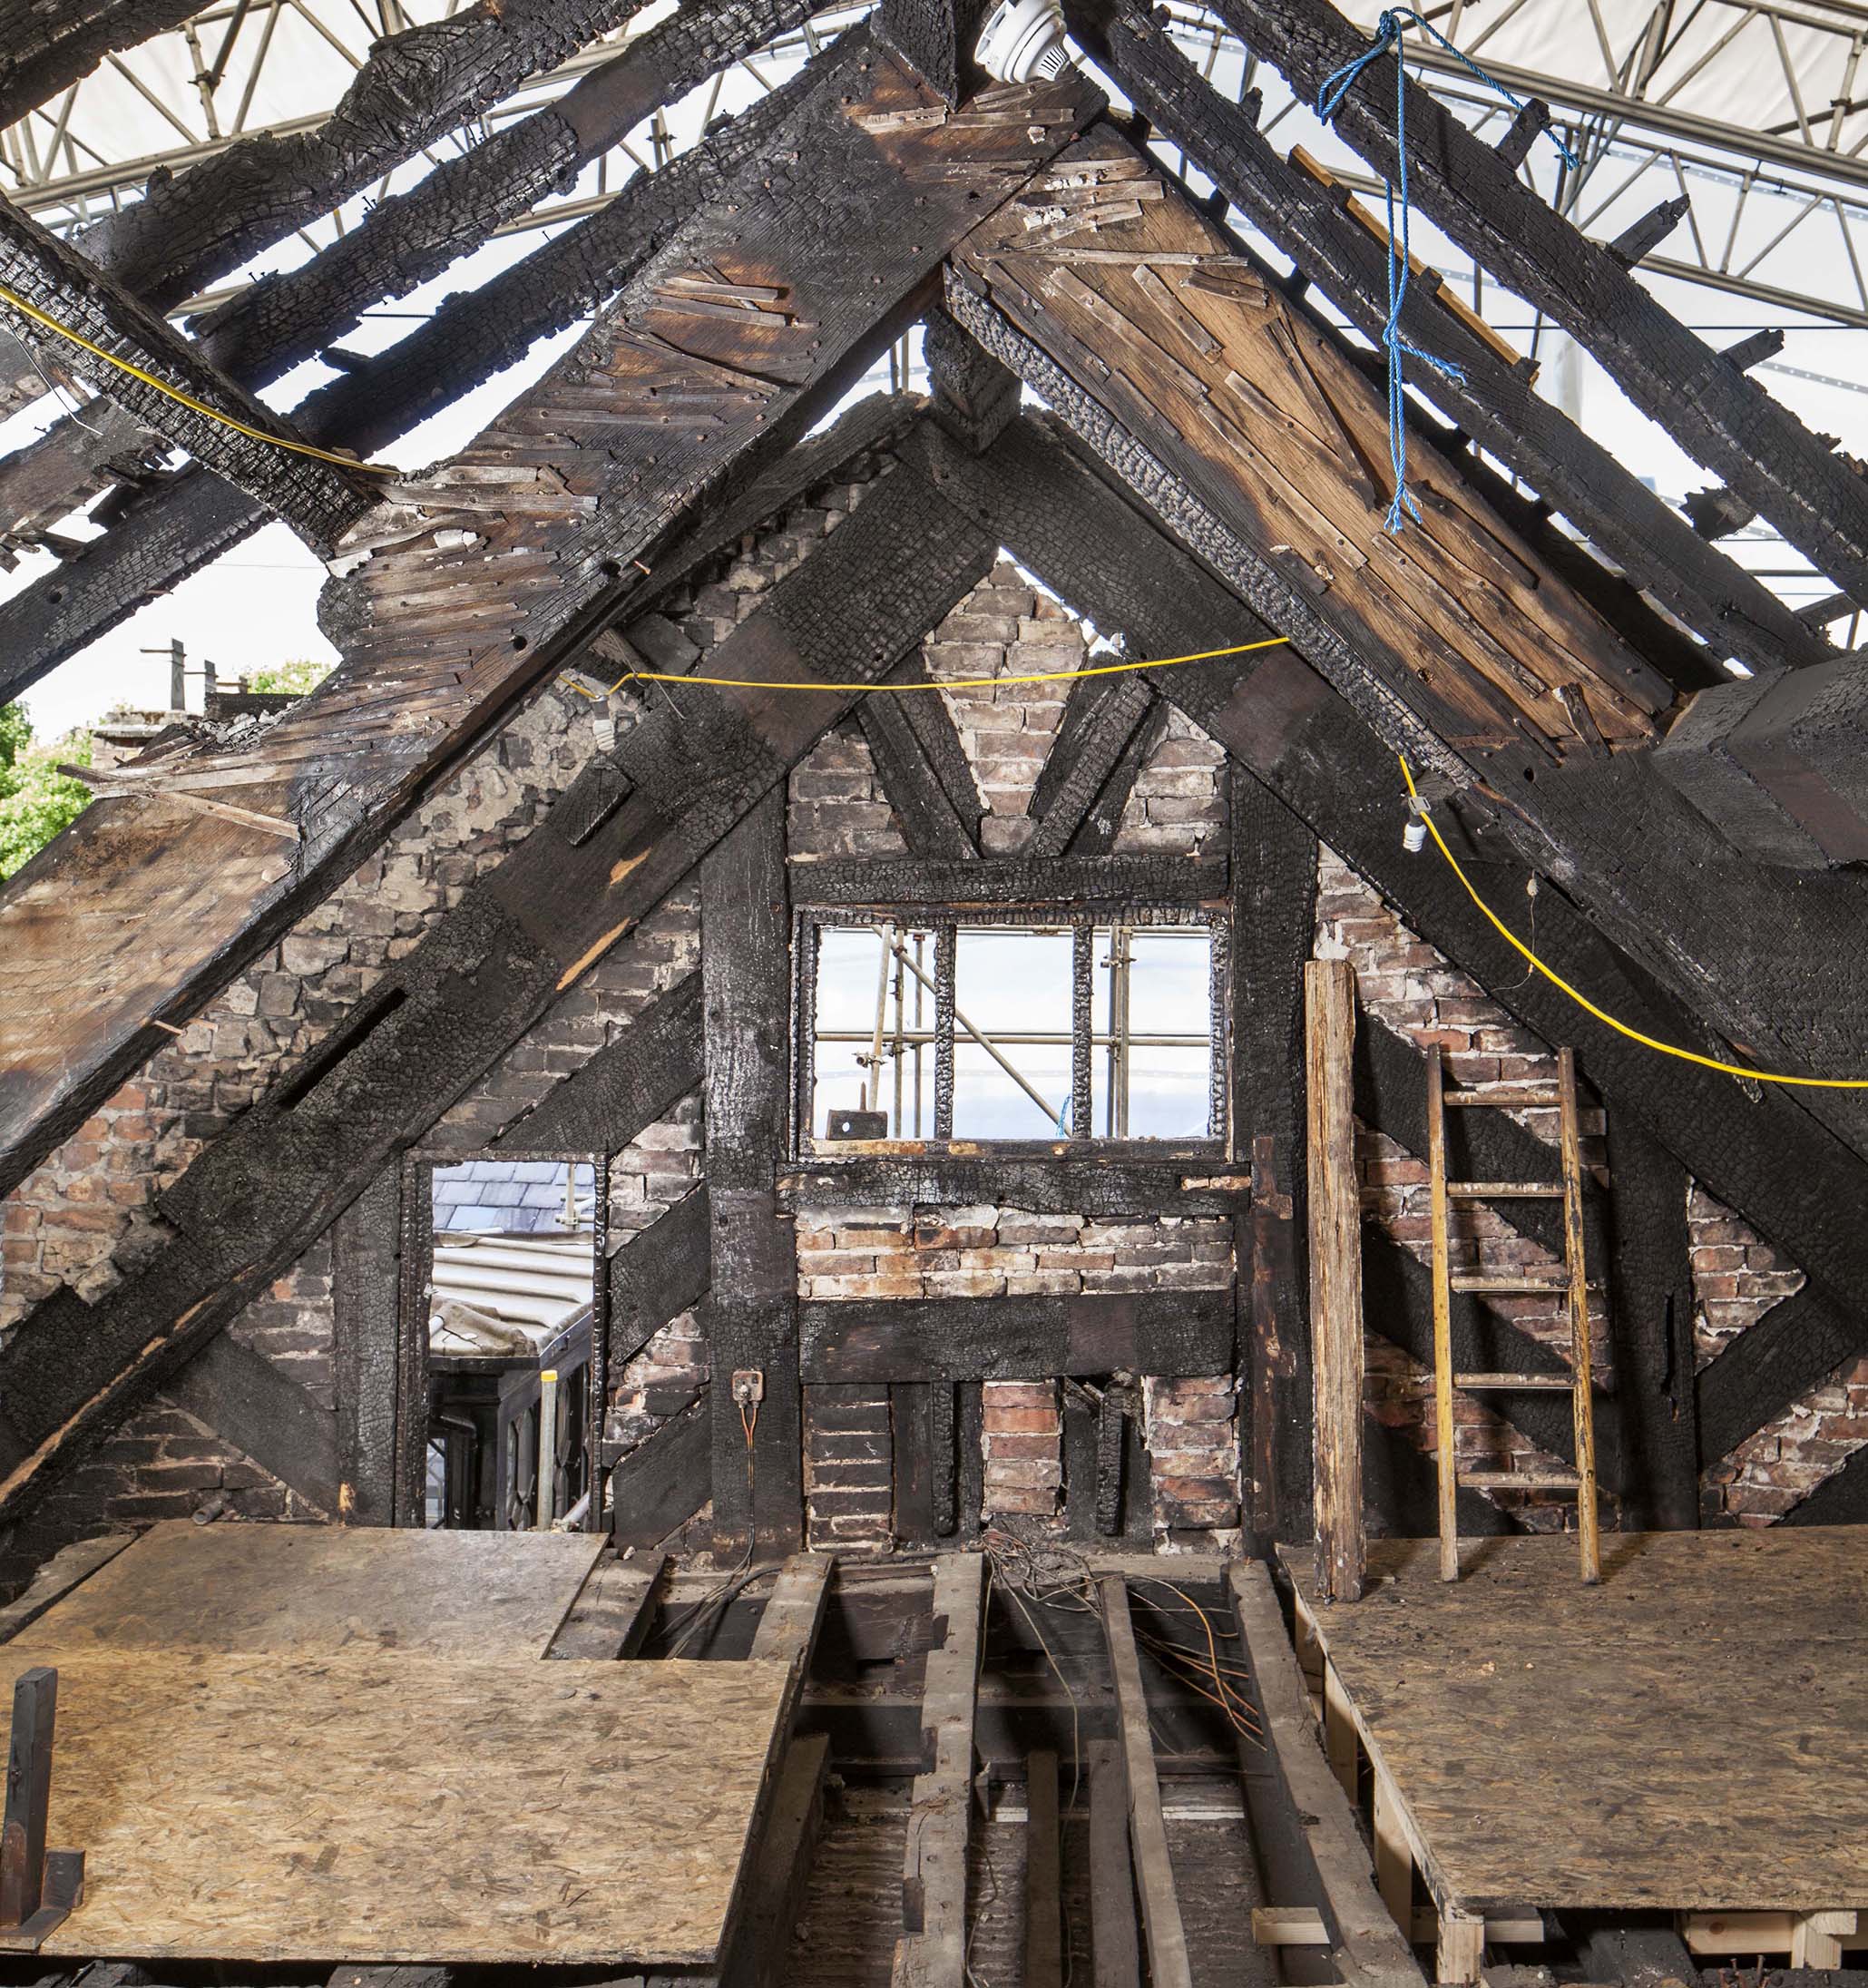 Fire damage up in the roof space of Wythenshawe Hall in Manchester.